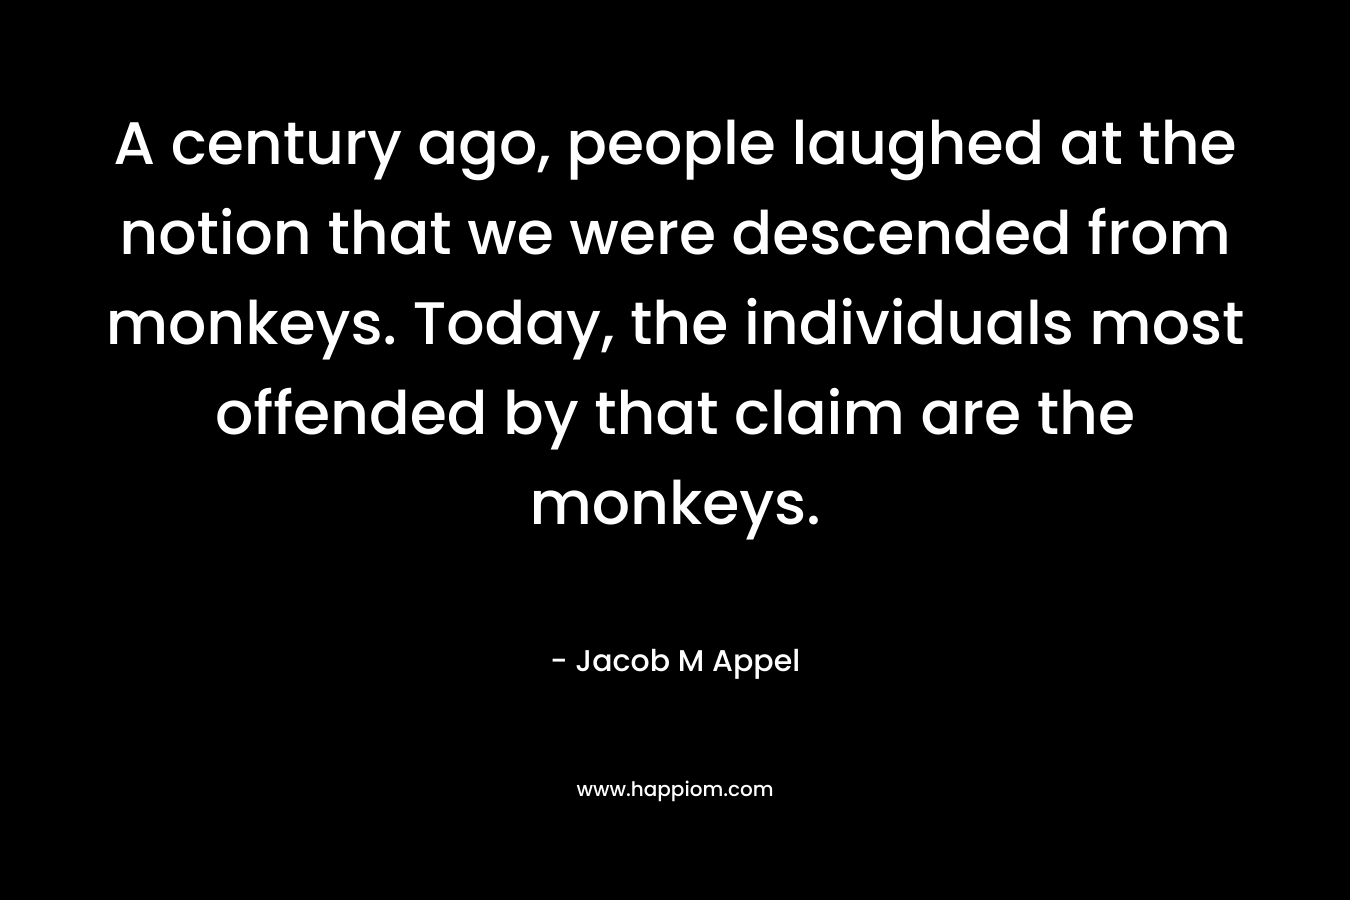 A century ago, people laughed at the notion that we were descended from monkeys. Today, the individuals most offended by that claim are the monkeys. – Jacob M Appel